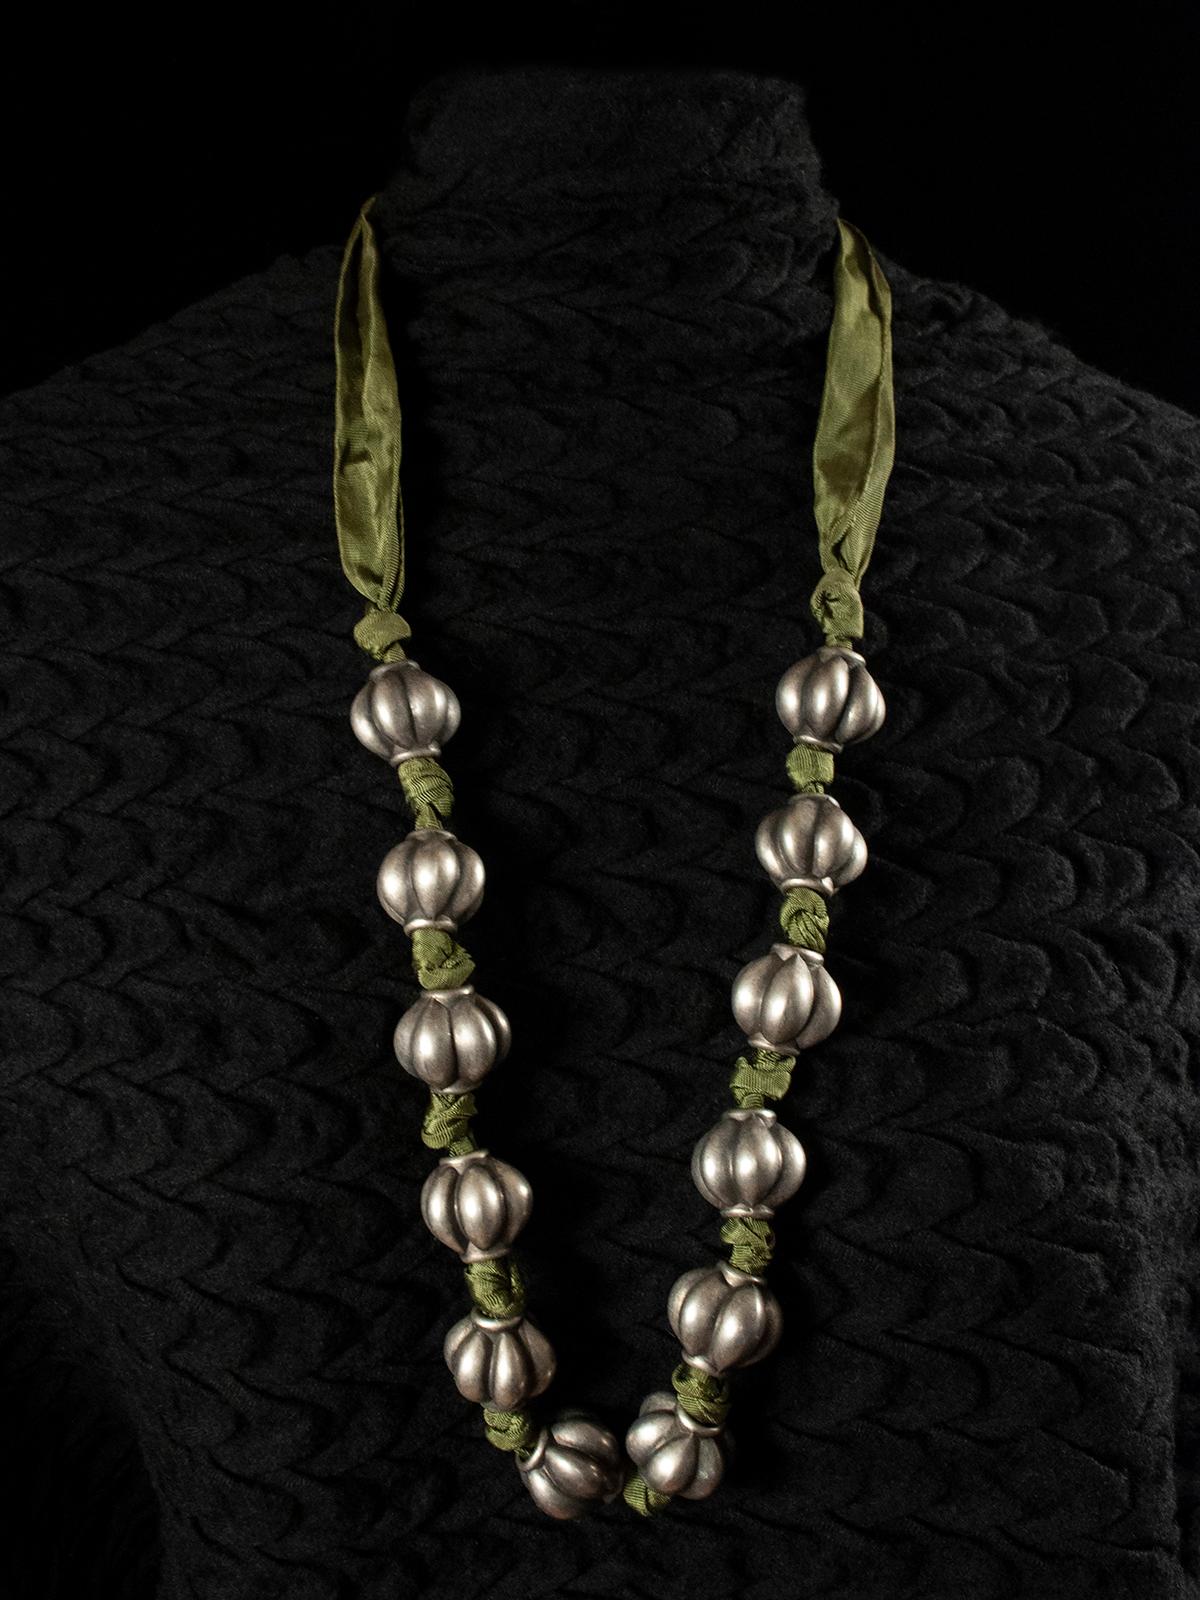 Chinese 20th Century Antique Silver Melon Bead and Green Ribbon Necklace